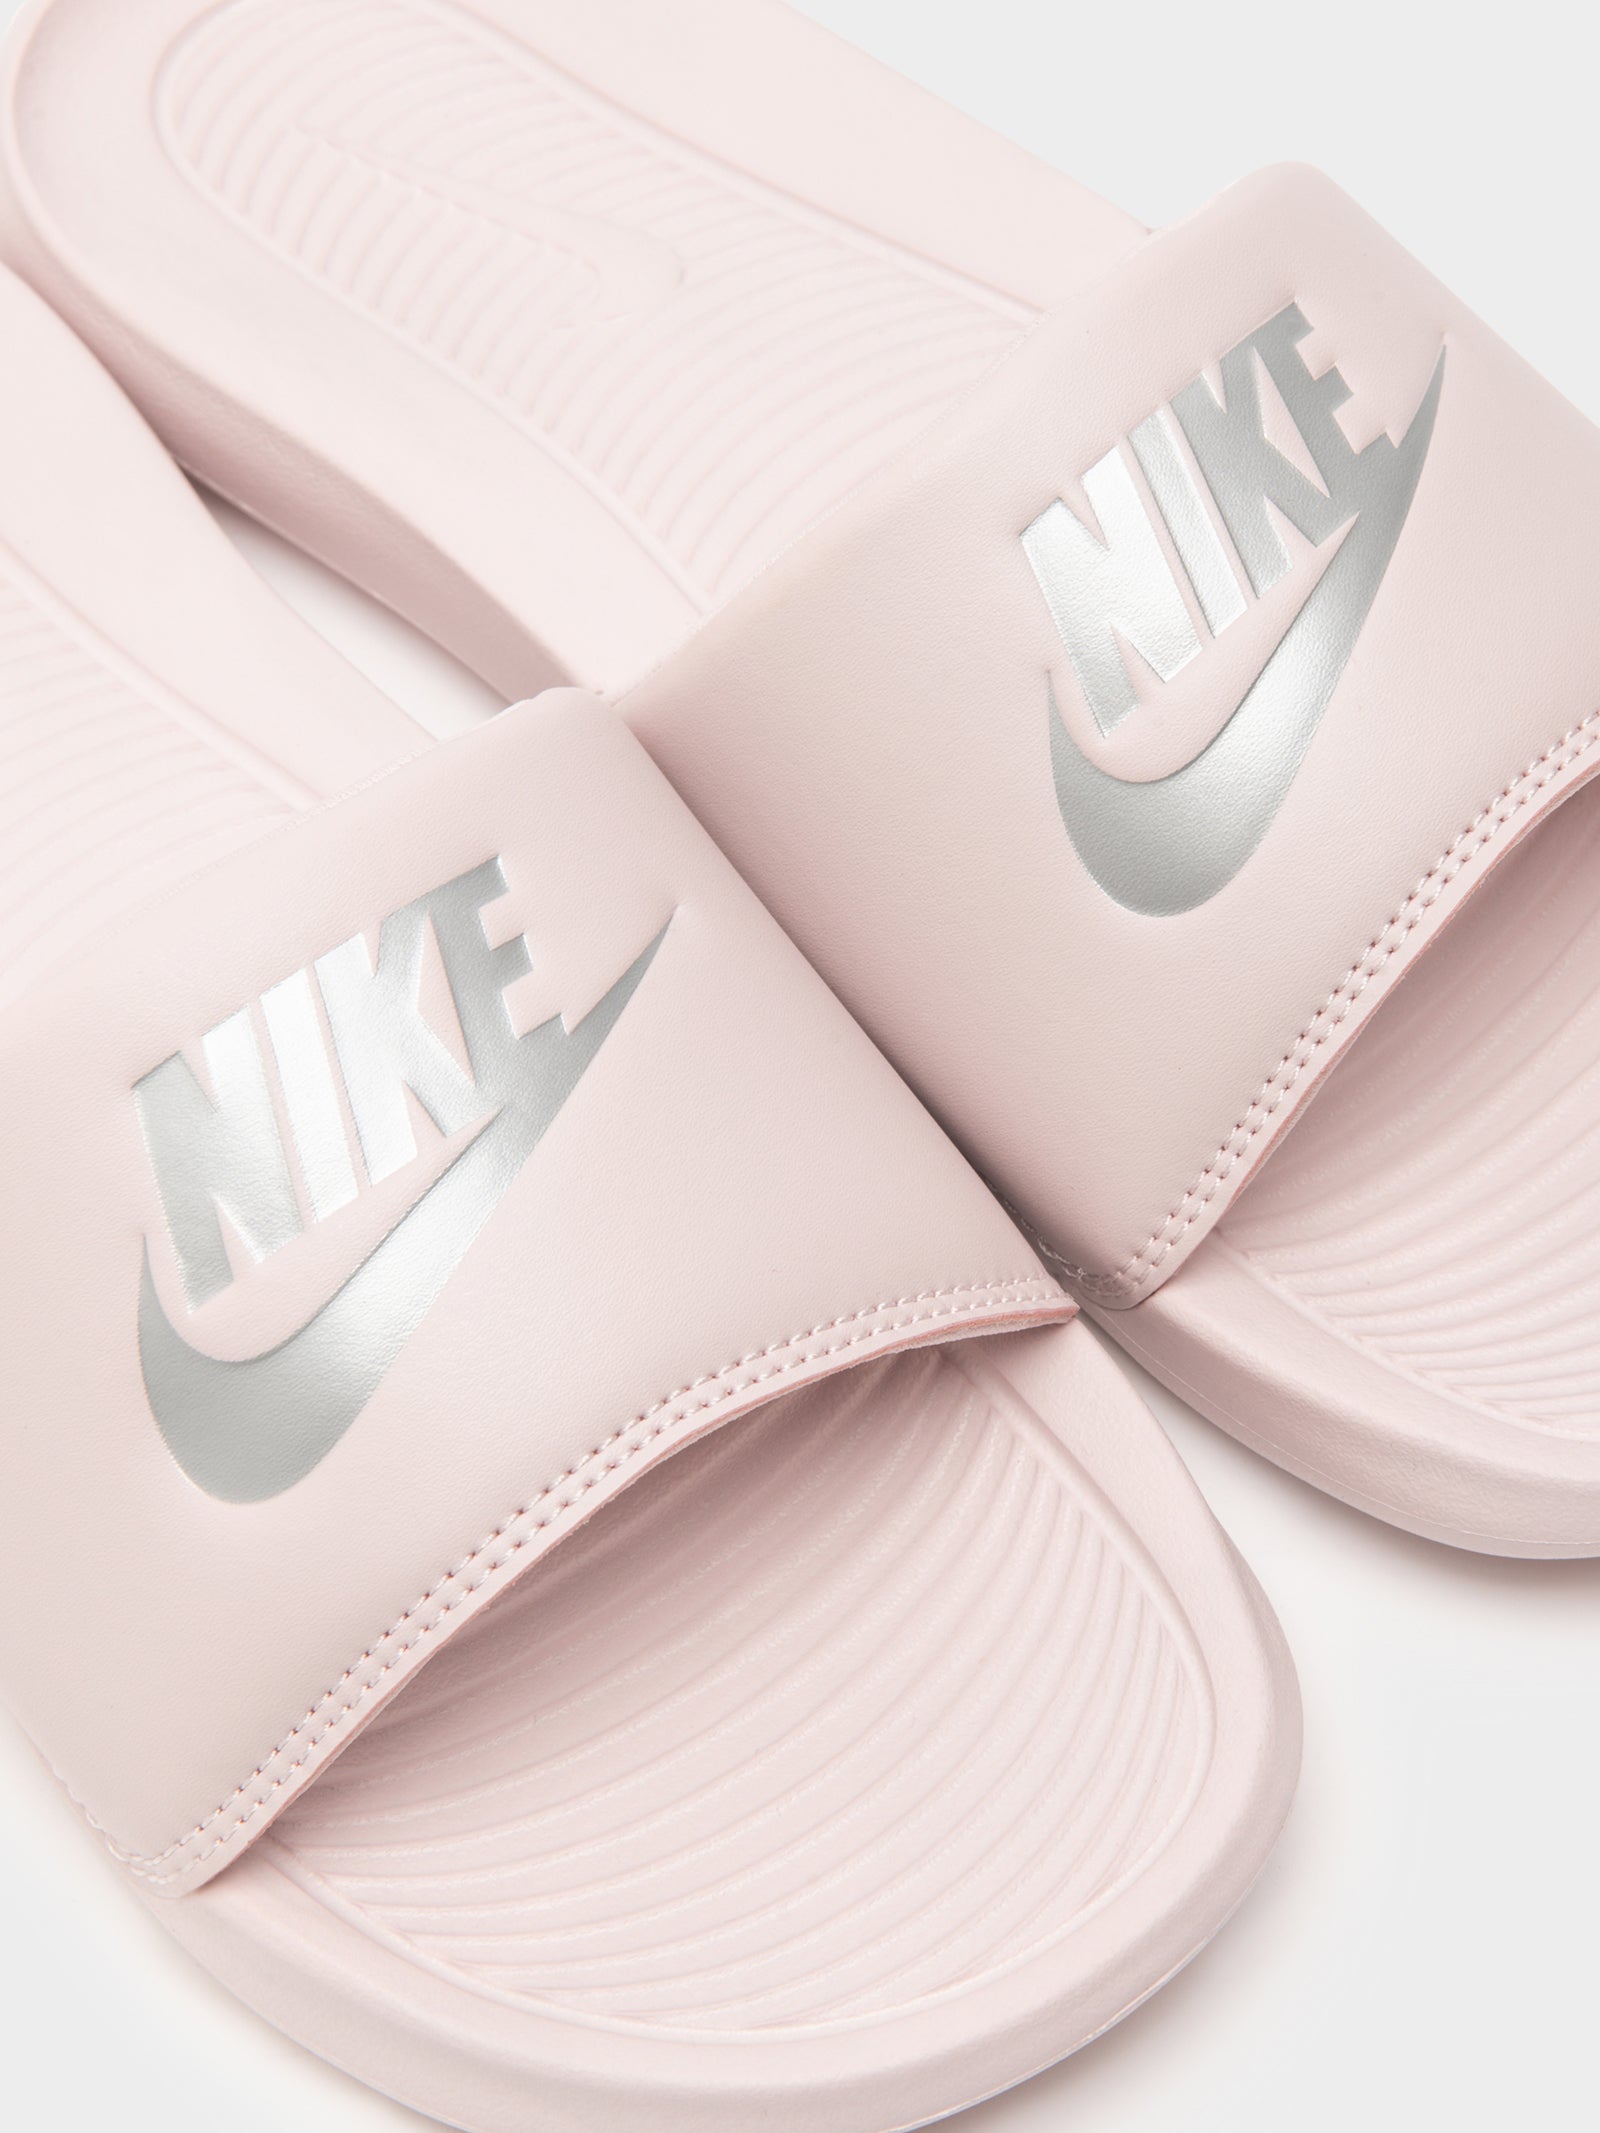 Womens Victori One Slides in Barely Rose Pink & Metallic Silver